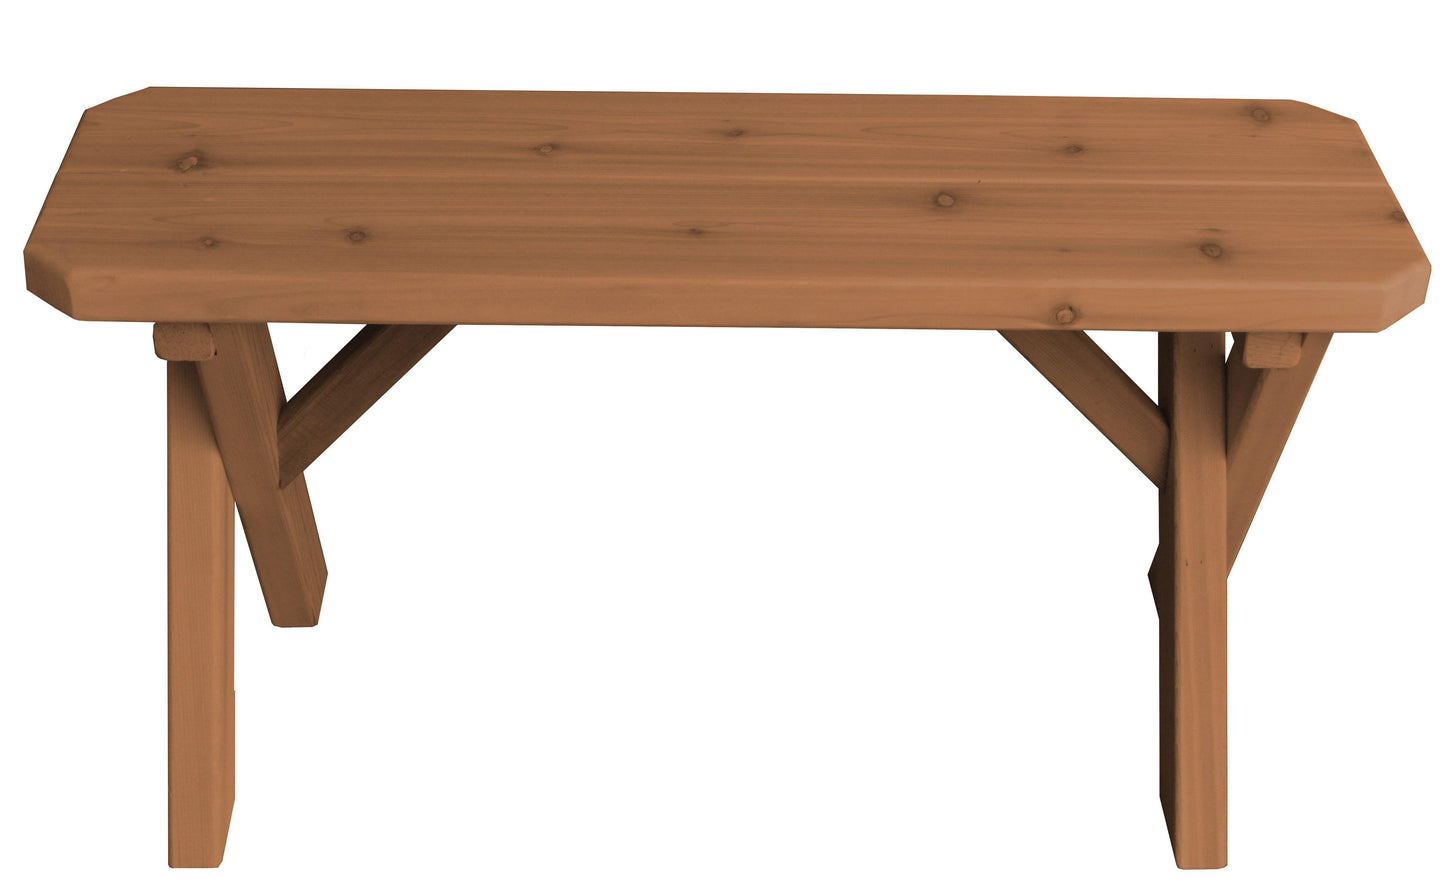 A&L FURNITURE CO. Western Red Cedar 94" Crossleg Bench Only - LEAD TIME TO SHIP 2 WEEKS